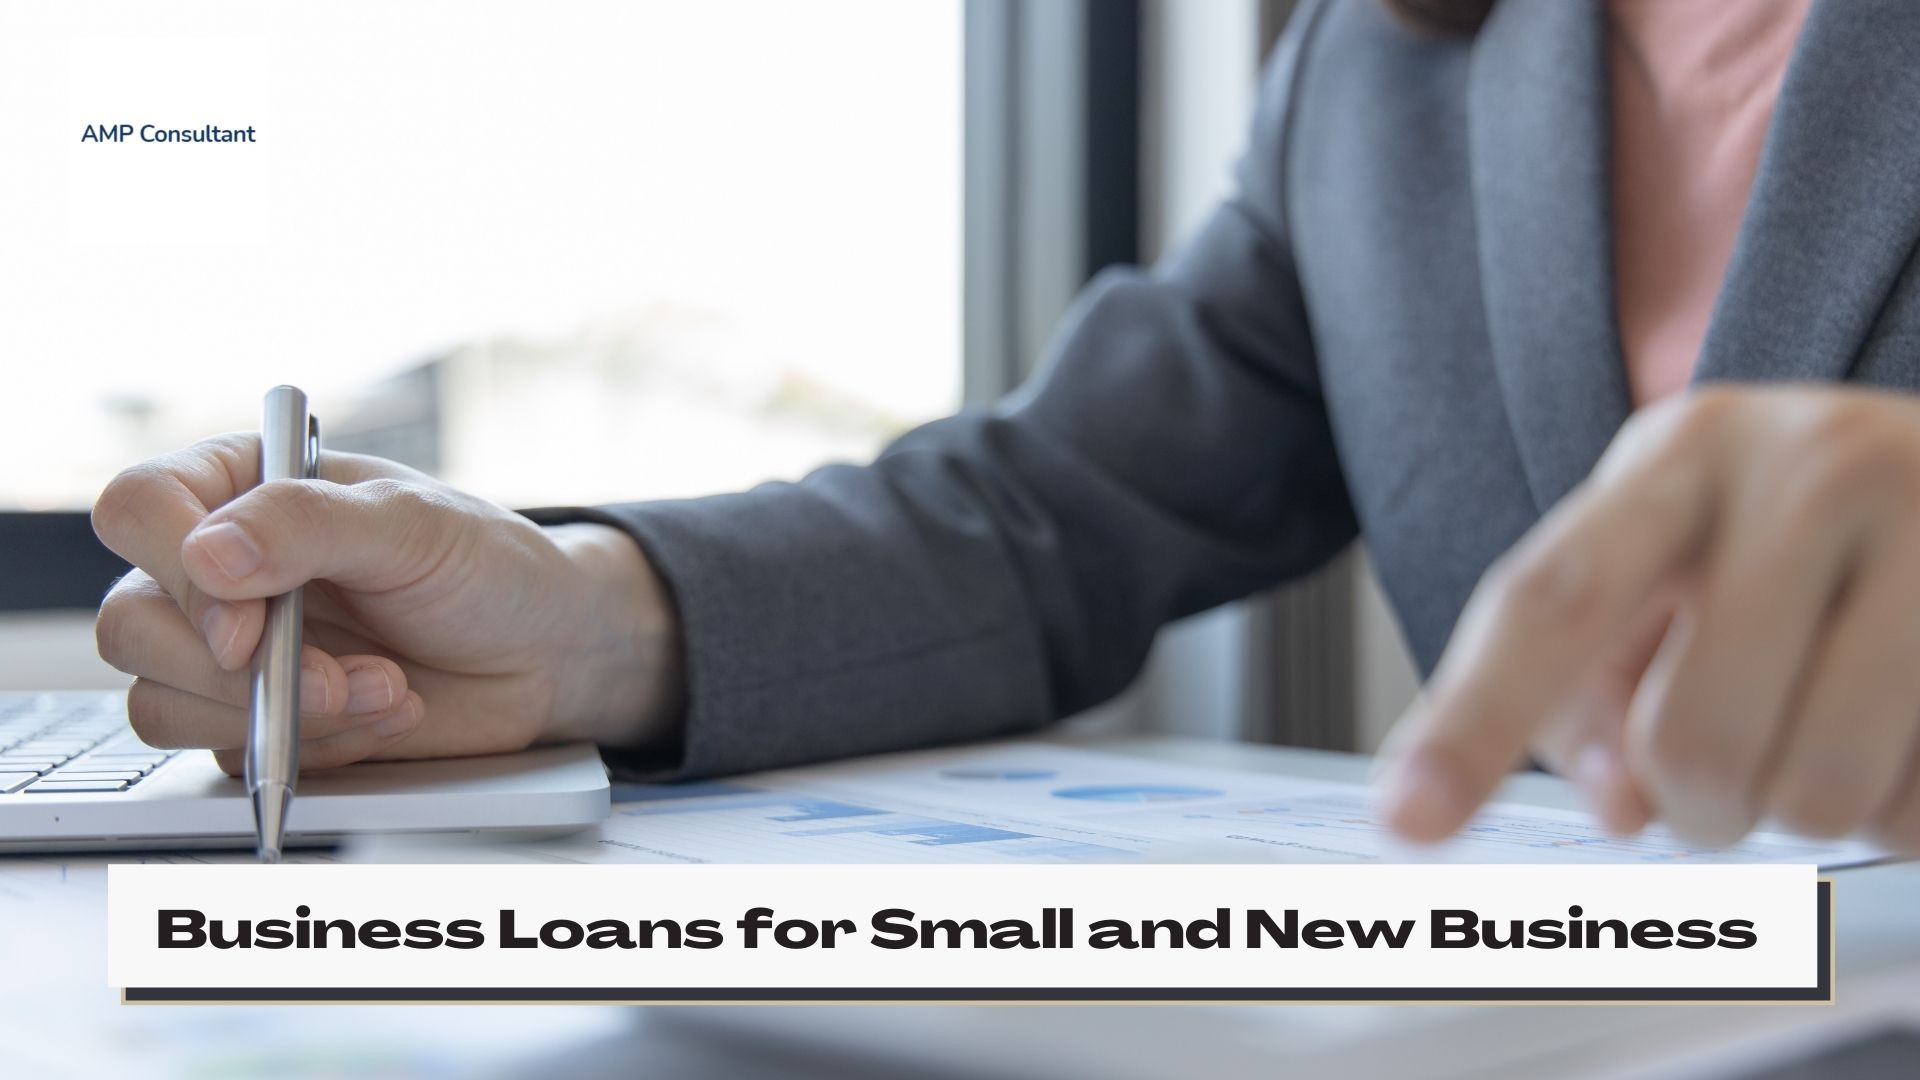 Business Loans for Small and New Business